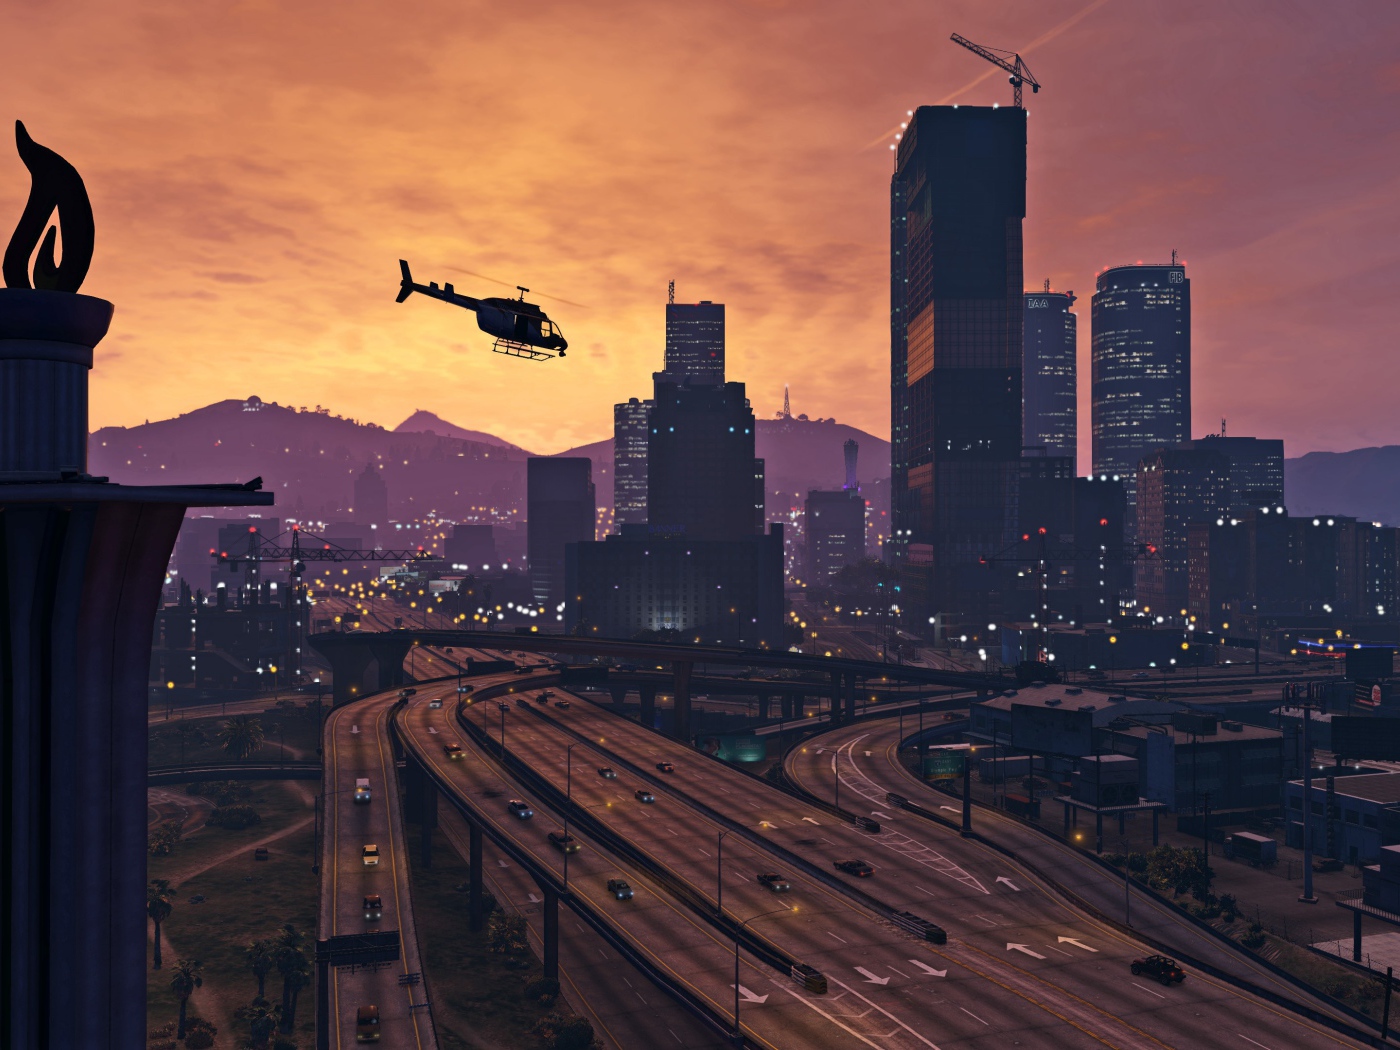 Panorama of the metropolis in the game Grand Theft Auto V